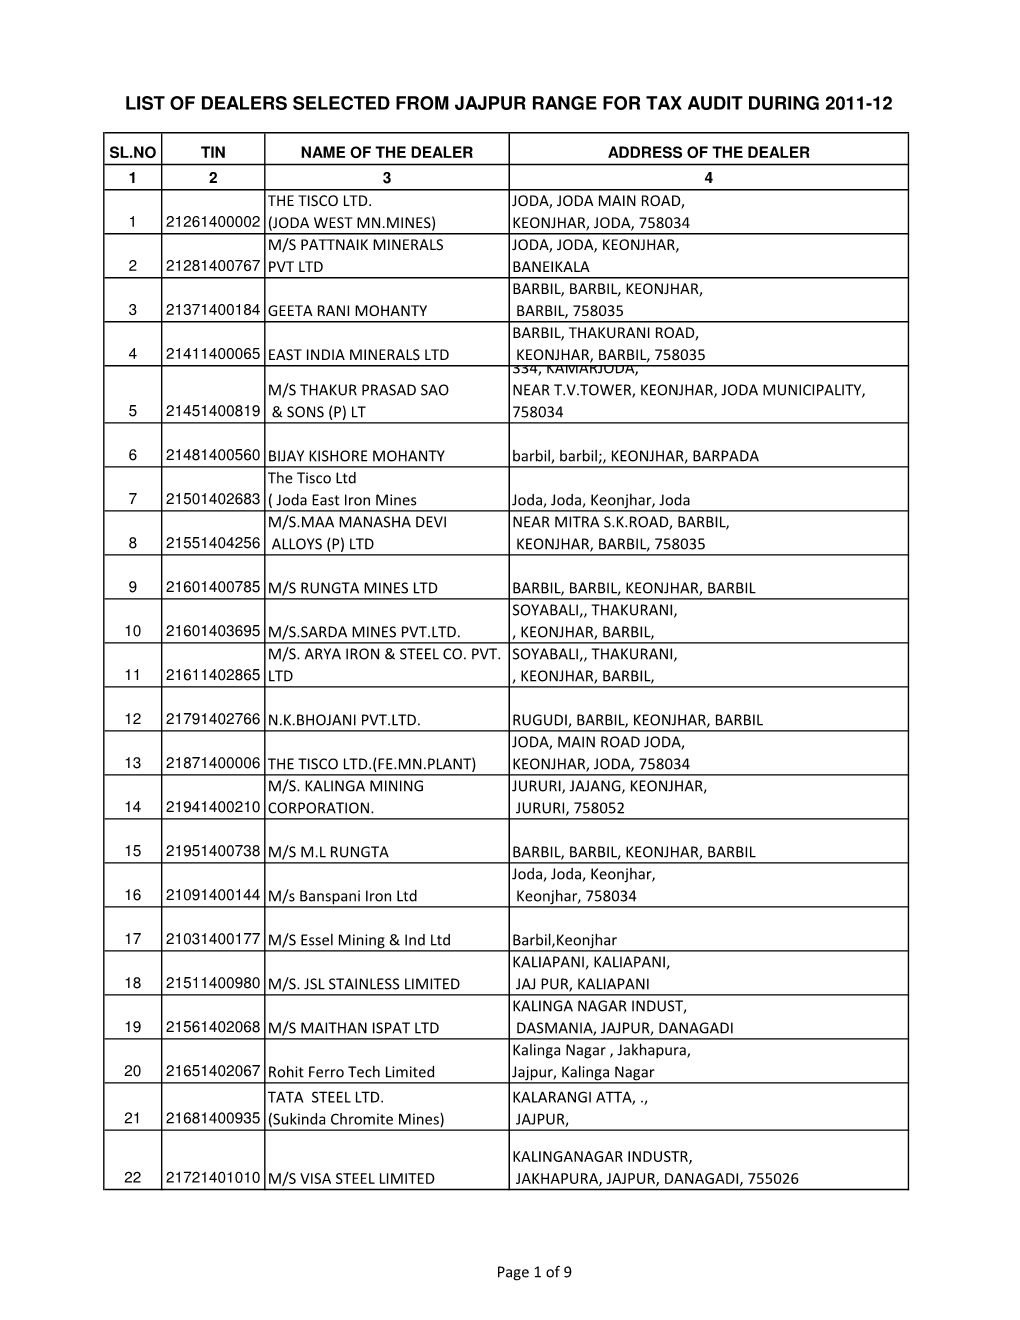 List of Dealers Selected from Jajpur Range for Tax Audit During 2011-12